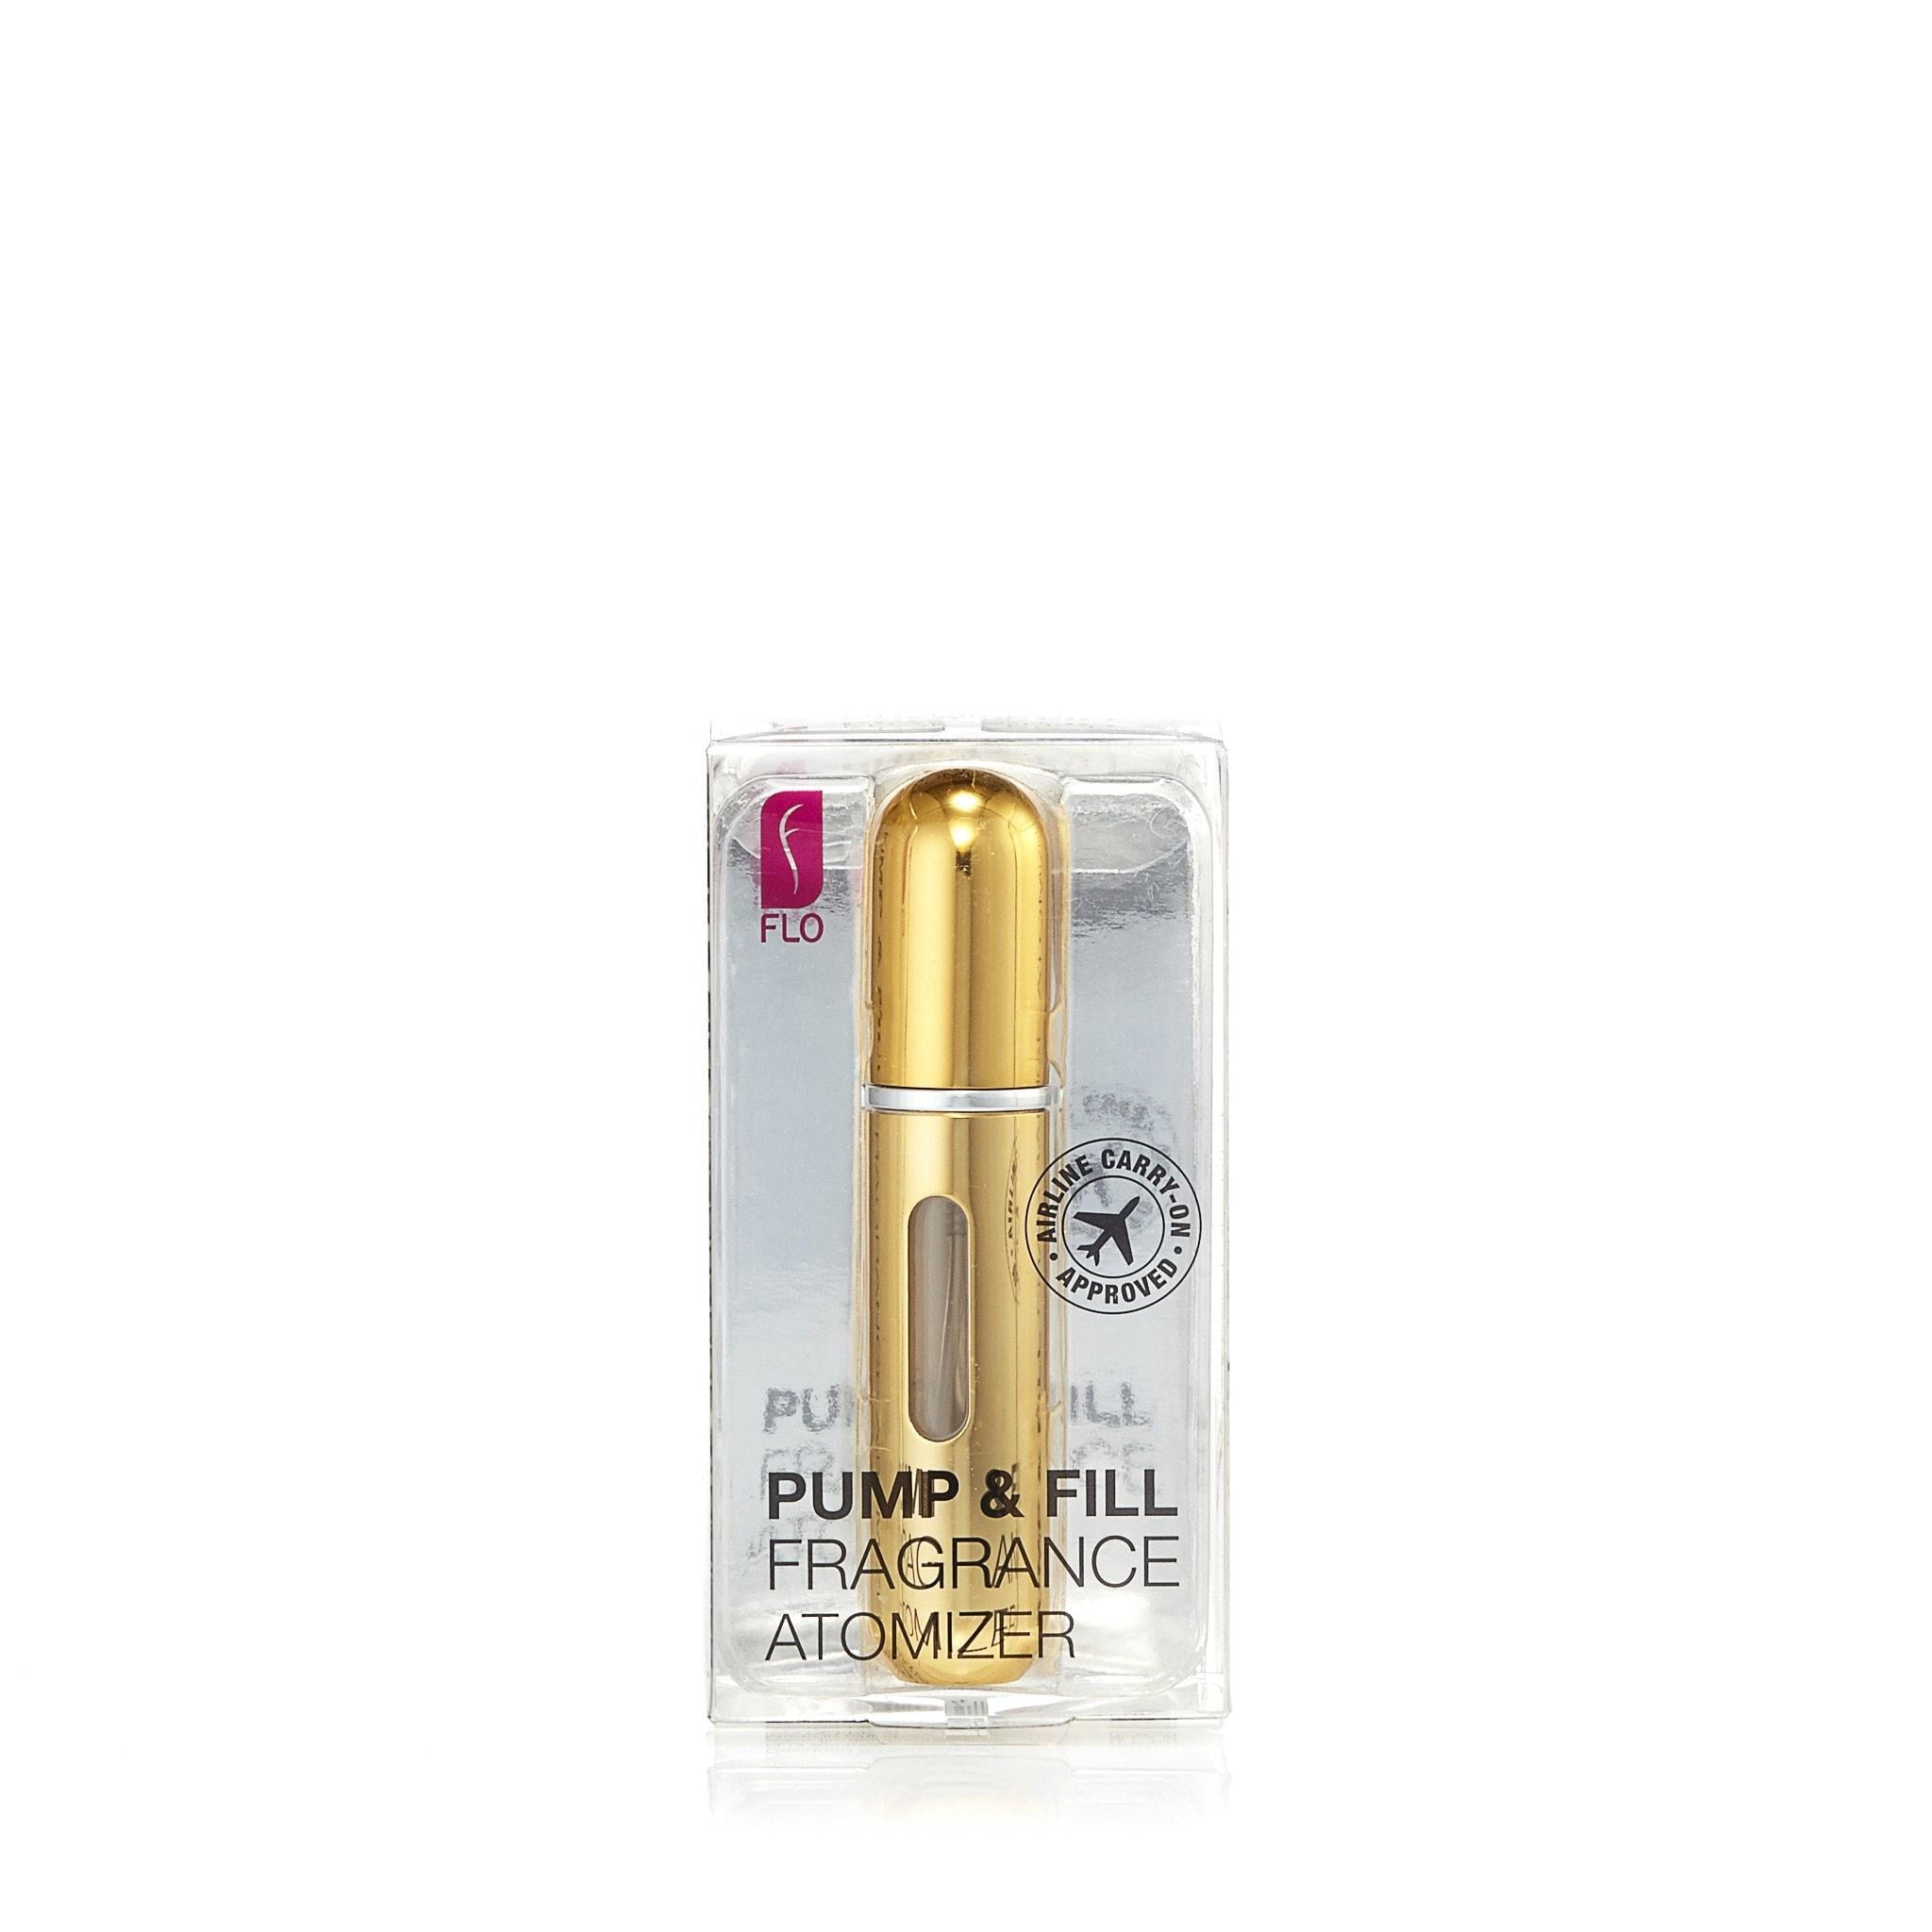 Pump and Fill Fragrance Perfumania – Atomizer Flo by